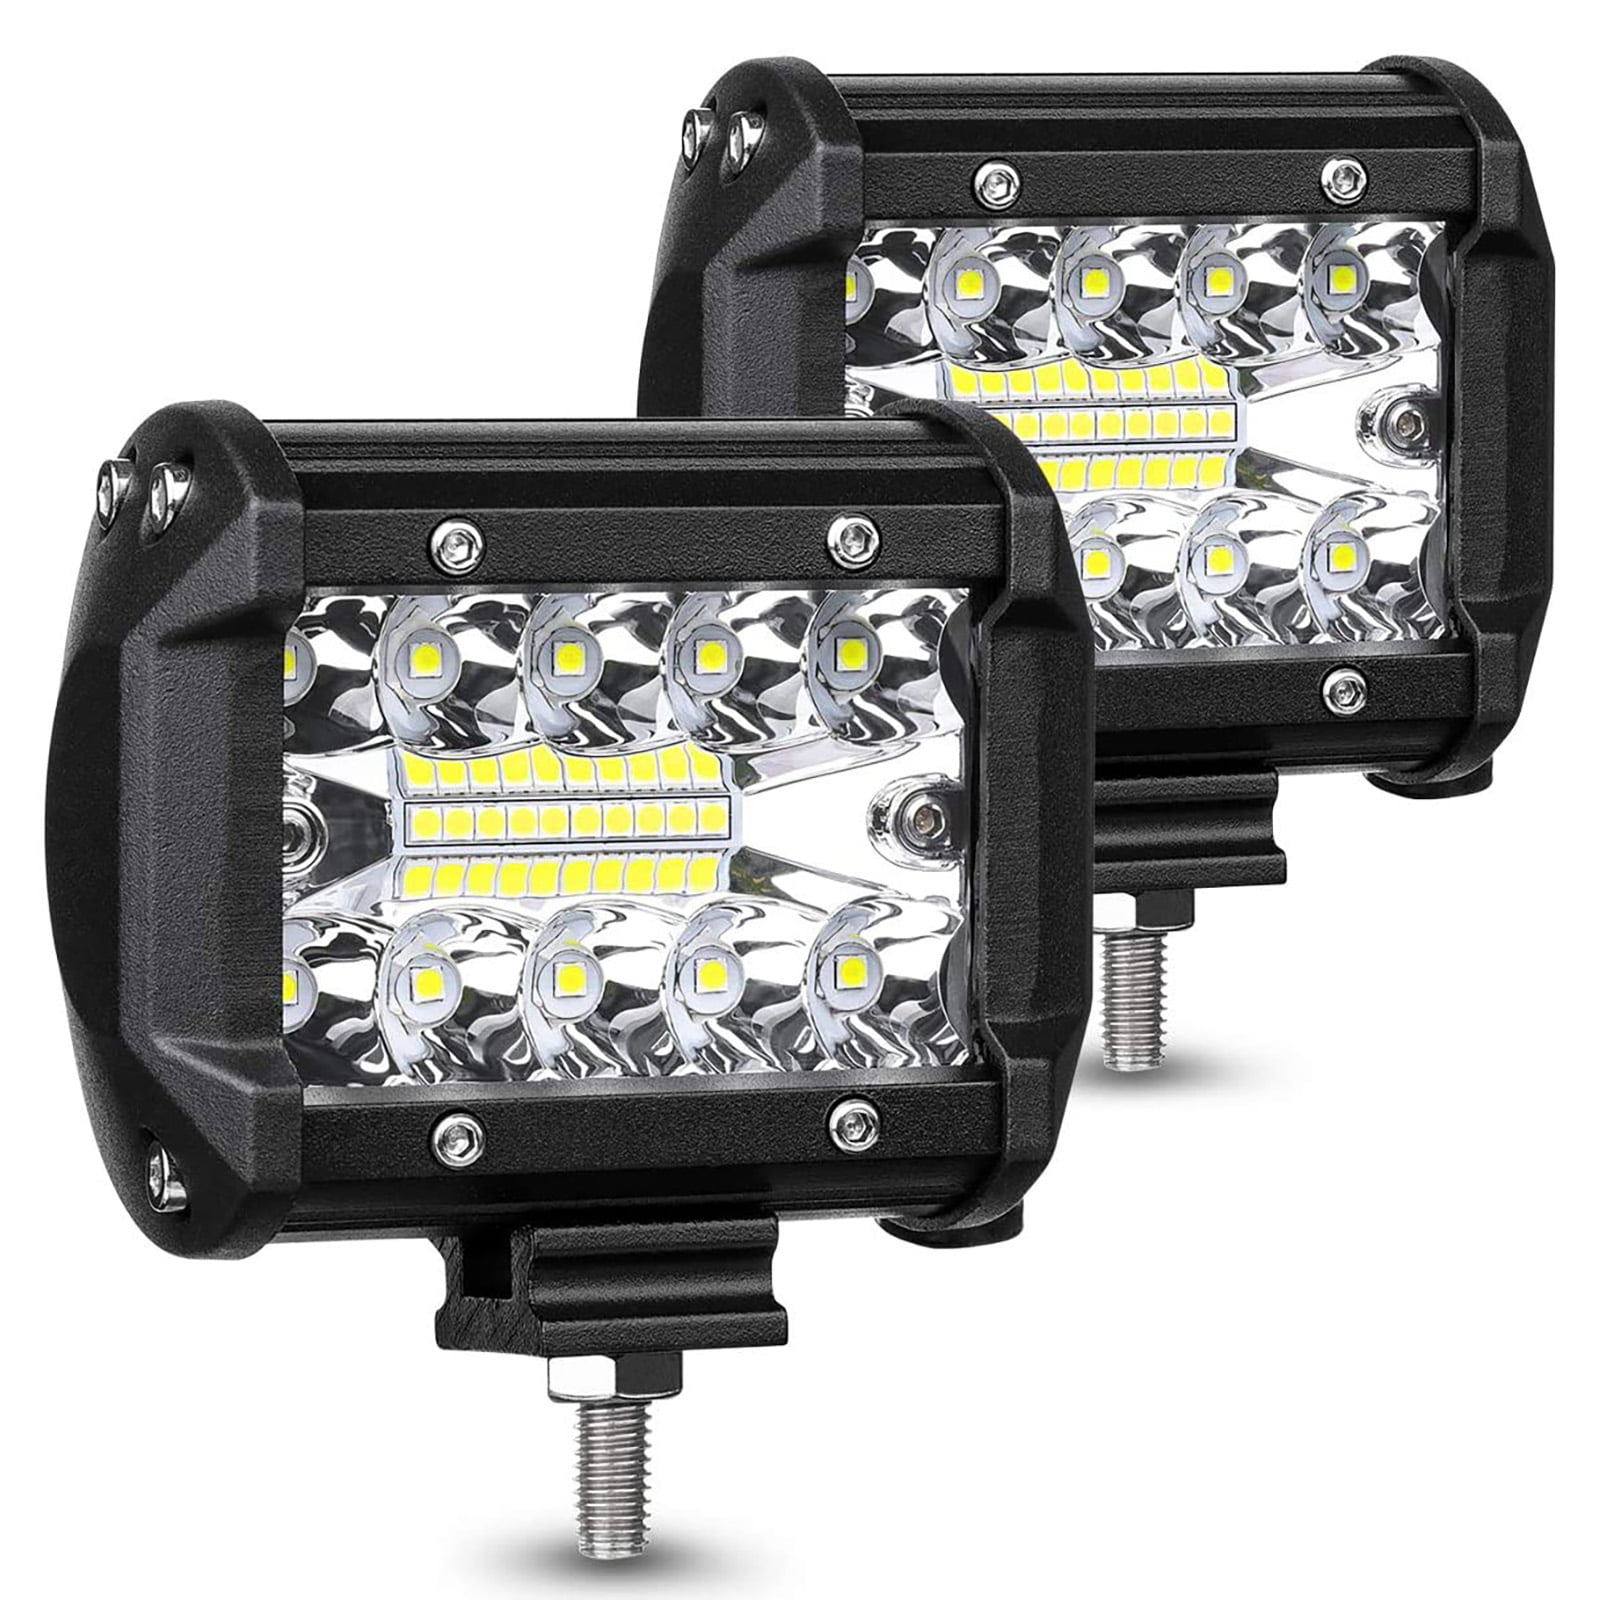 2PC 48W 4Inch Cree Led Work Light Spot Beam Tractor Truck Trailer Driving Lamp 